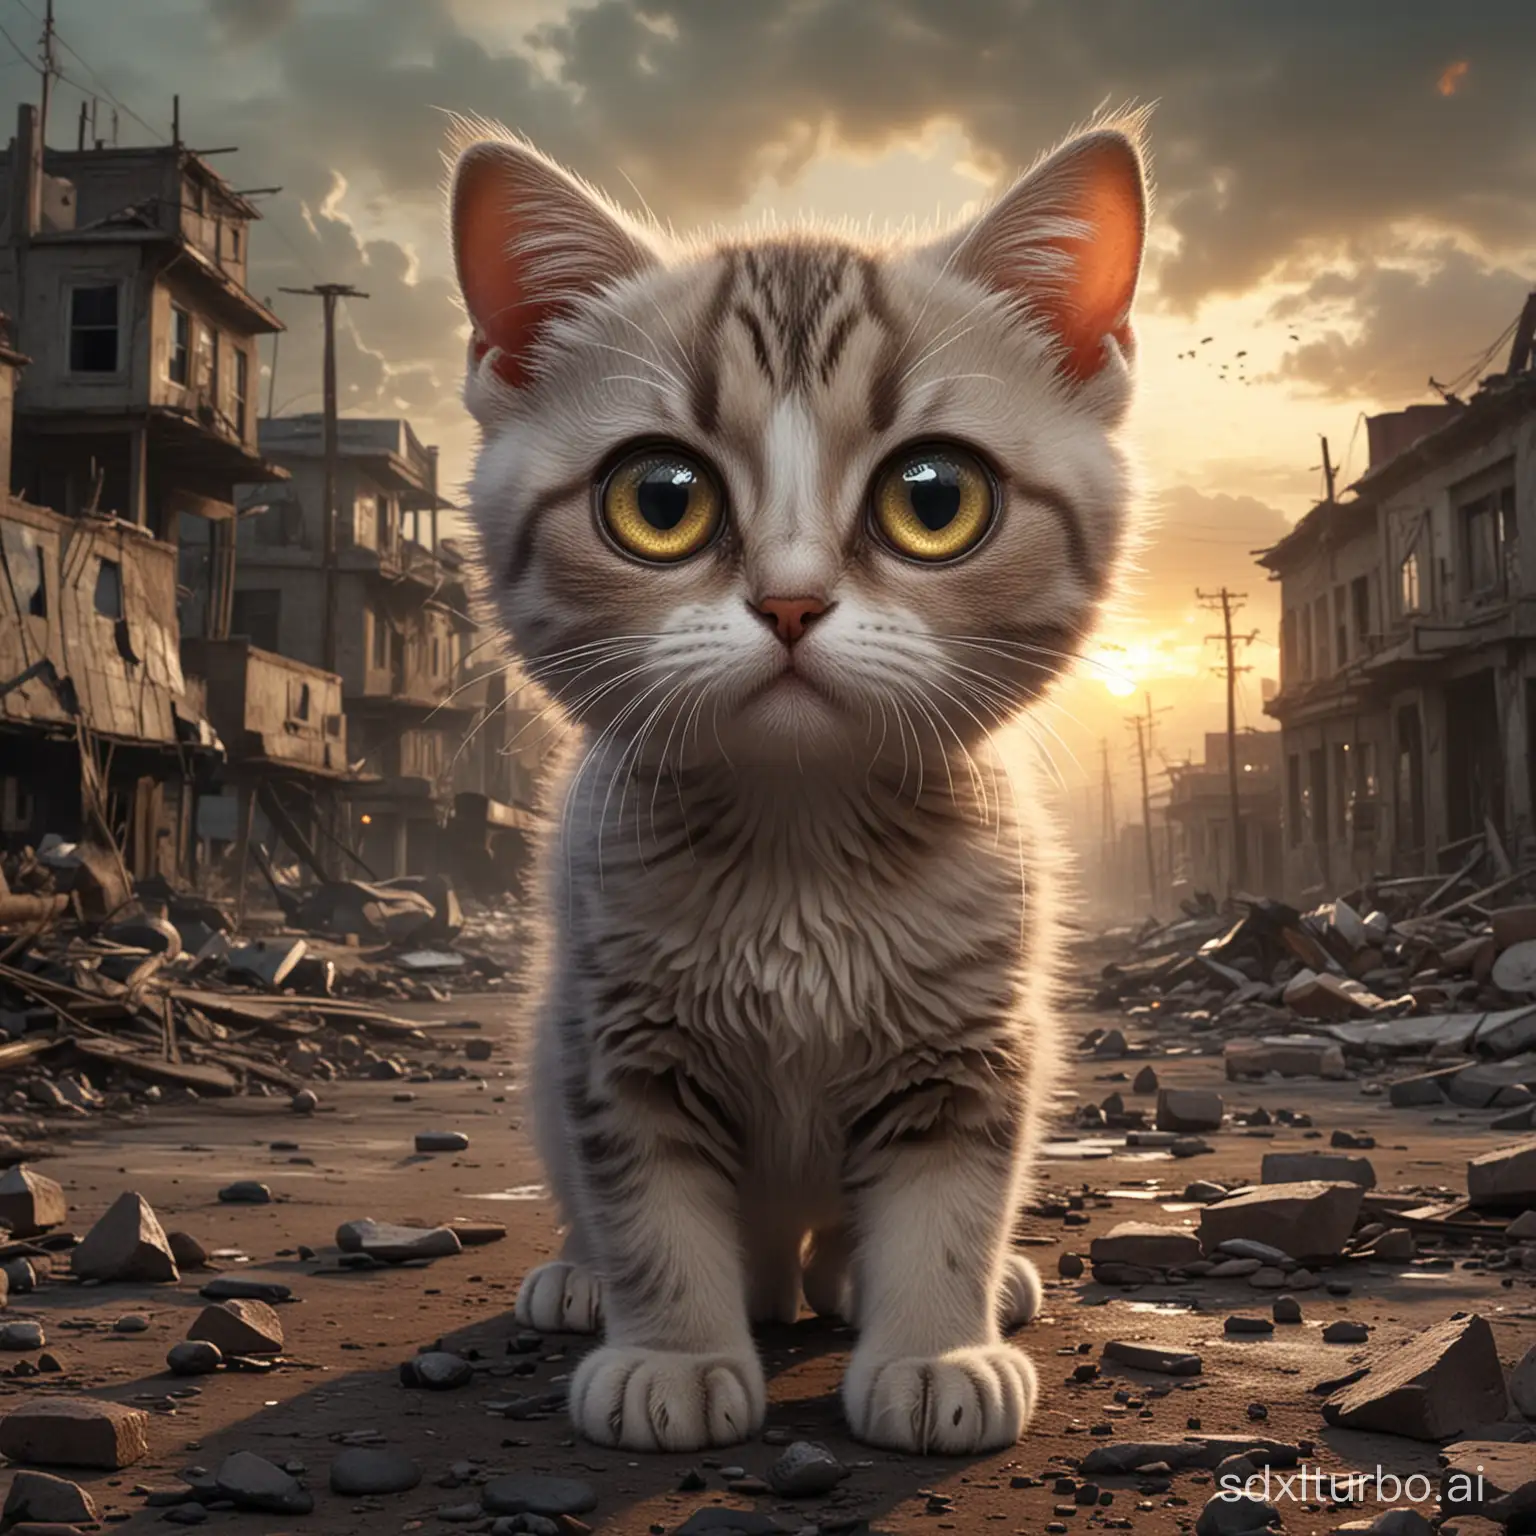 Adorable-Cat-Surviving-the-Apocalypse-with-Enormous-Eyes